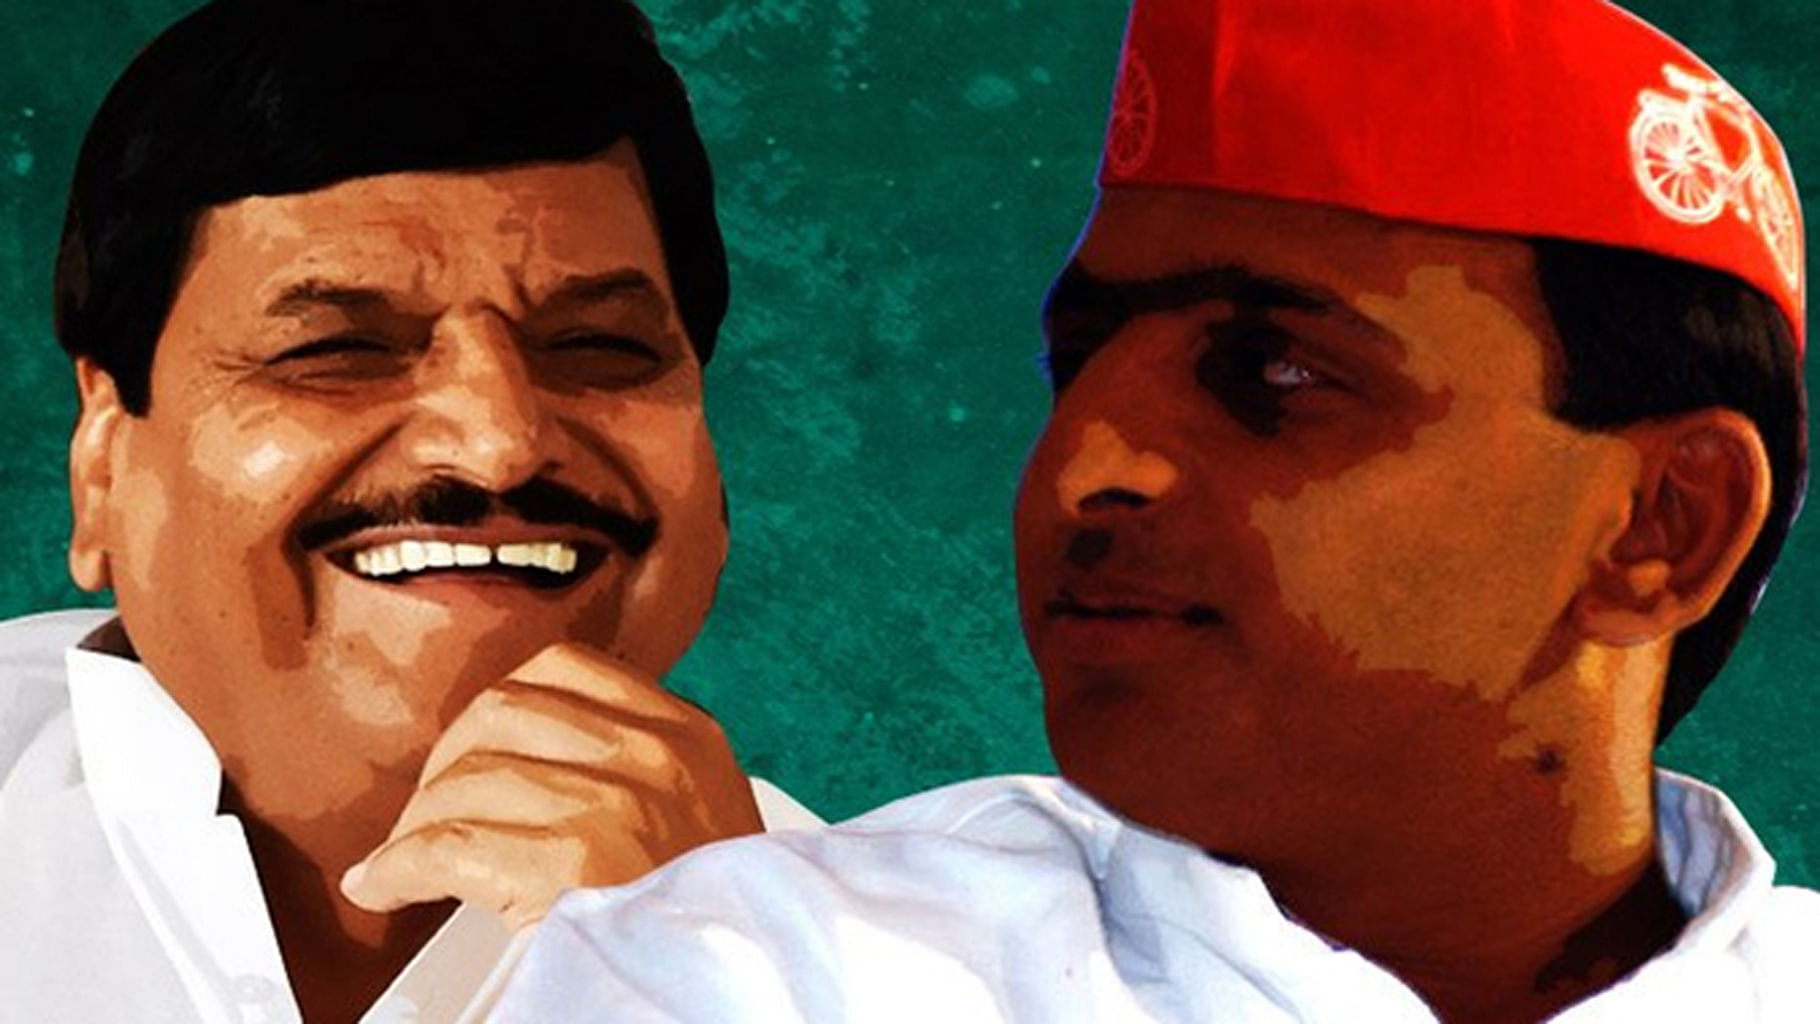 Shivpal Yadav who had earlier threatened to resign alleging rampant corruption in the Uttar Pradesh government (Photo: <b>The Quint</b>)